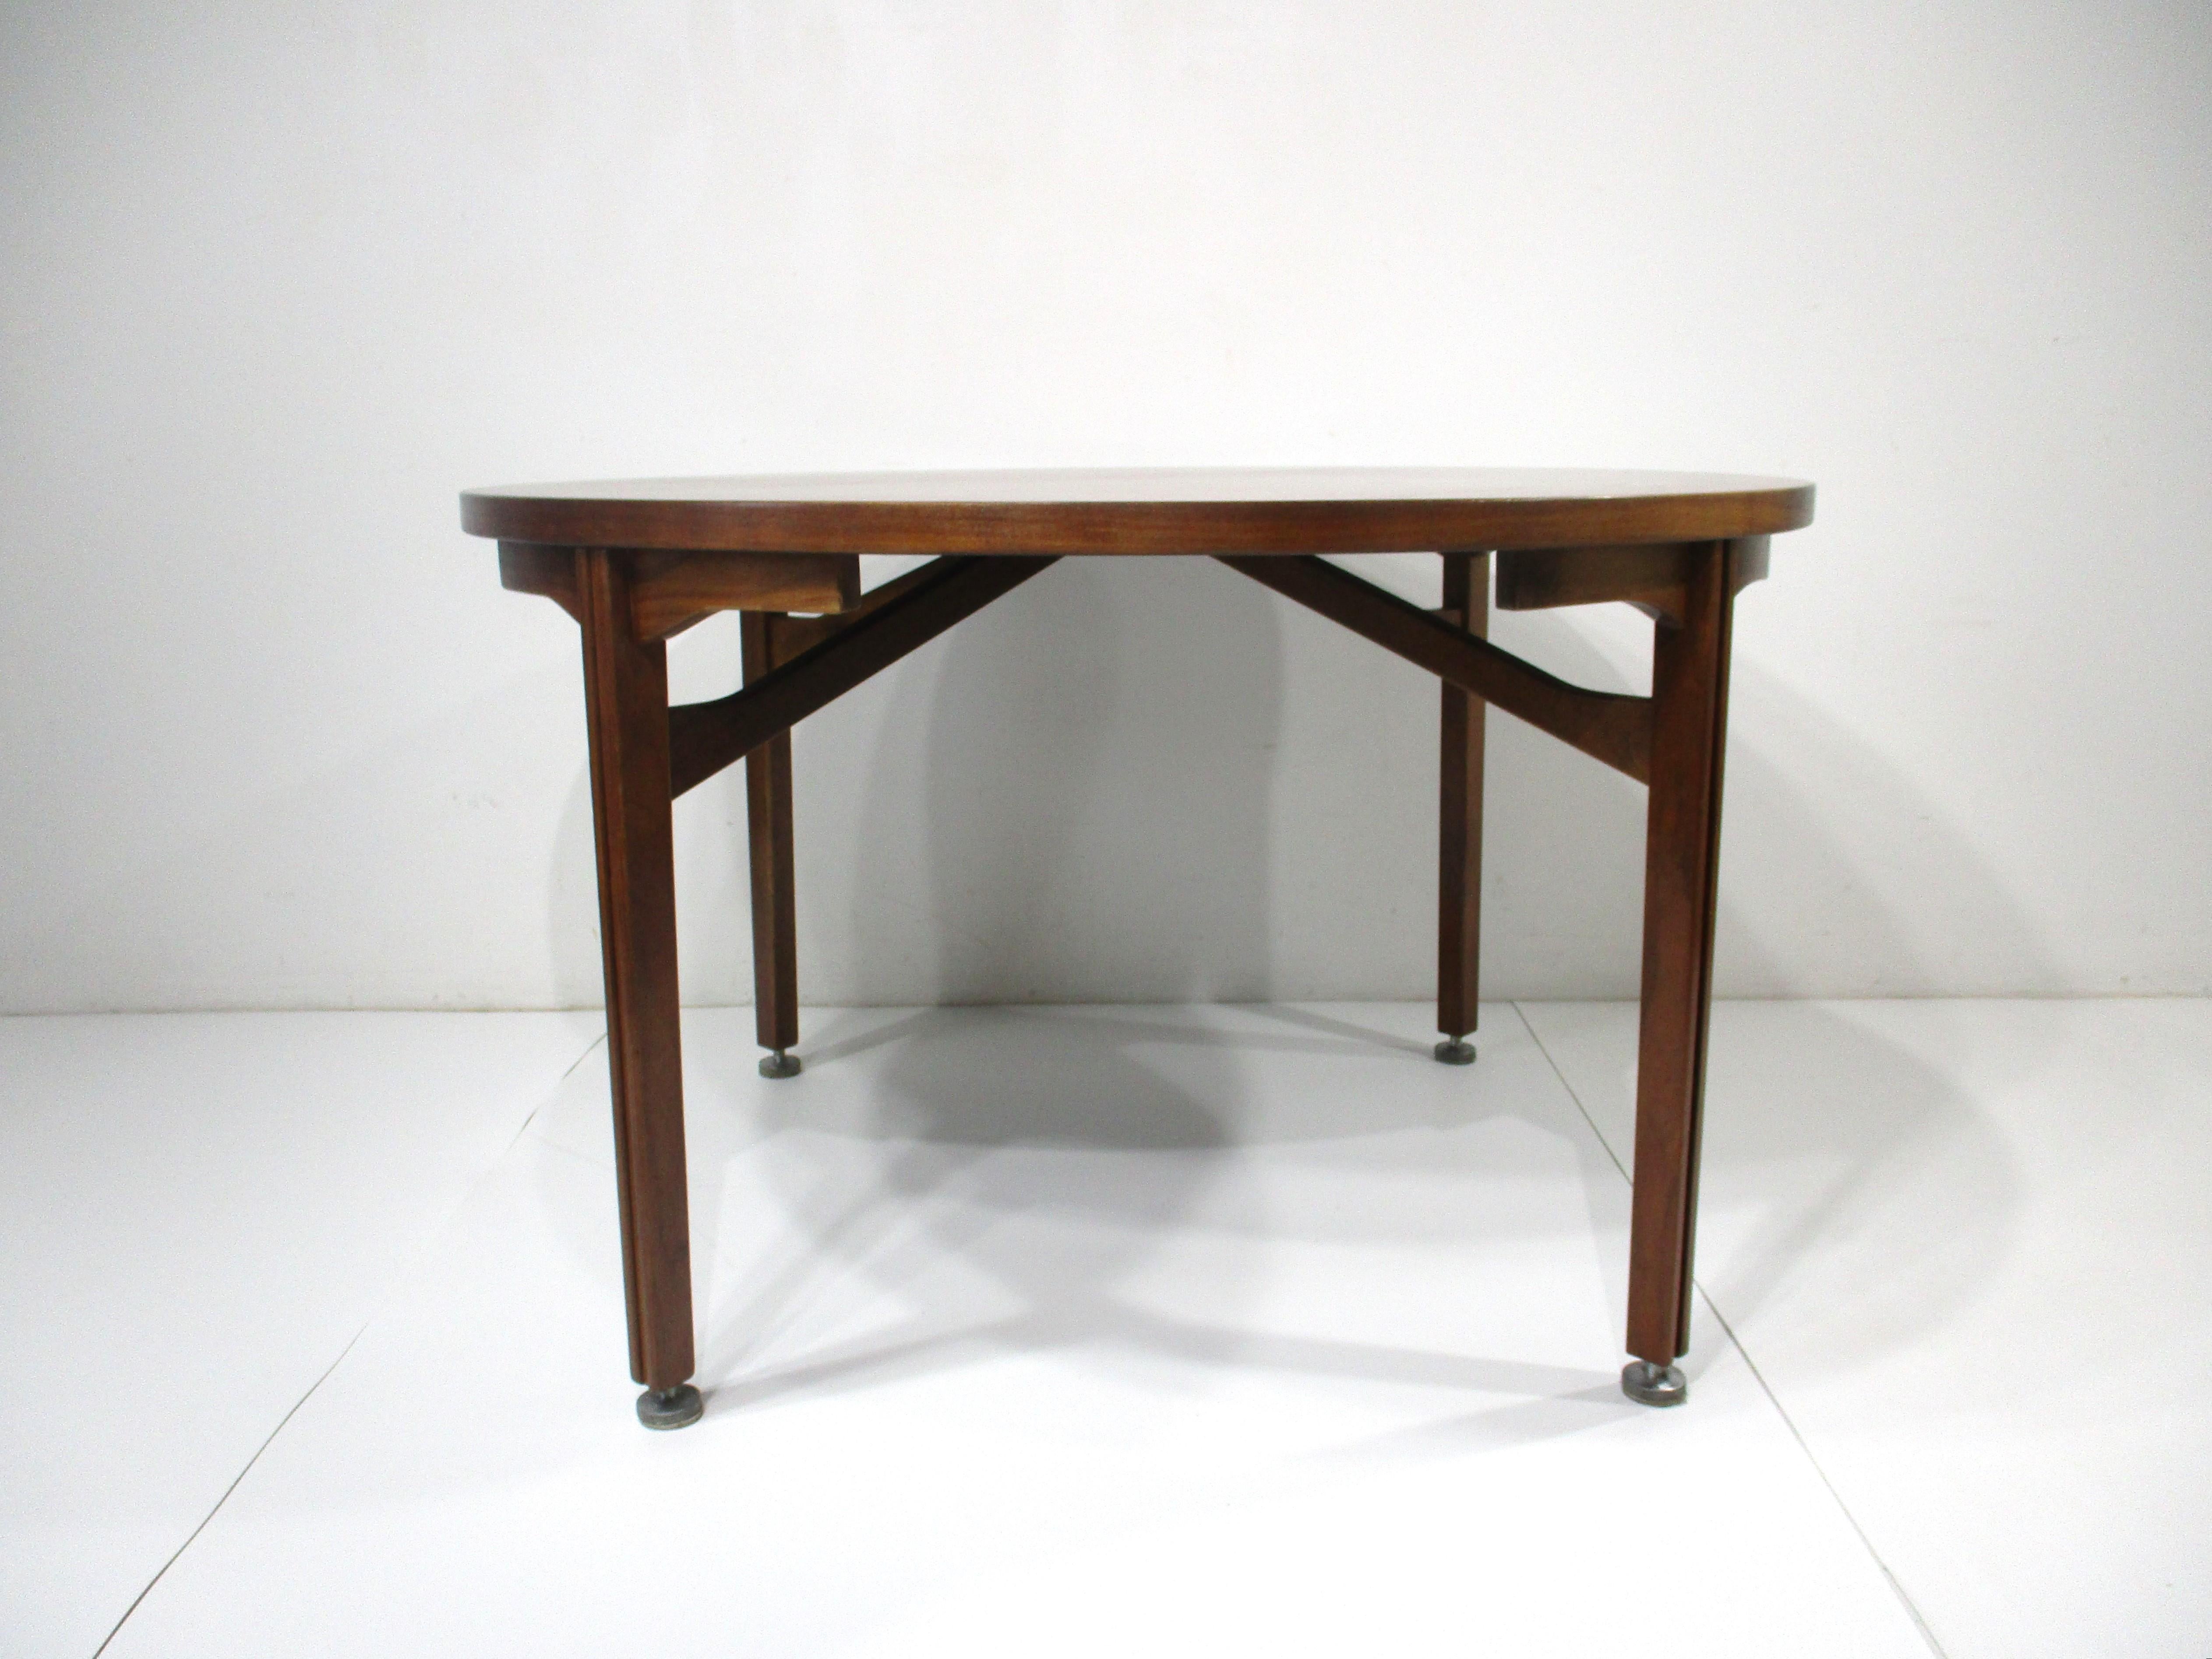 A very well crafted medium dark walnut round dining table with sturdy legs having a groove line in each one and cast aluminum foot pads . Designed by Jens Risom for his company Jens Risom Designs , the top has wonderful graining giving the piece a